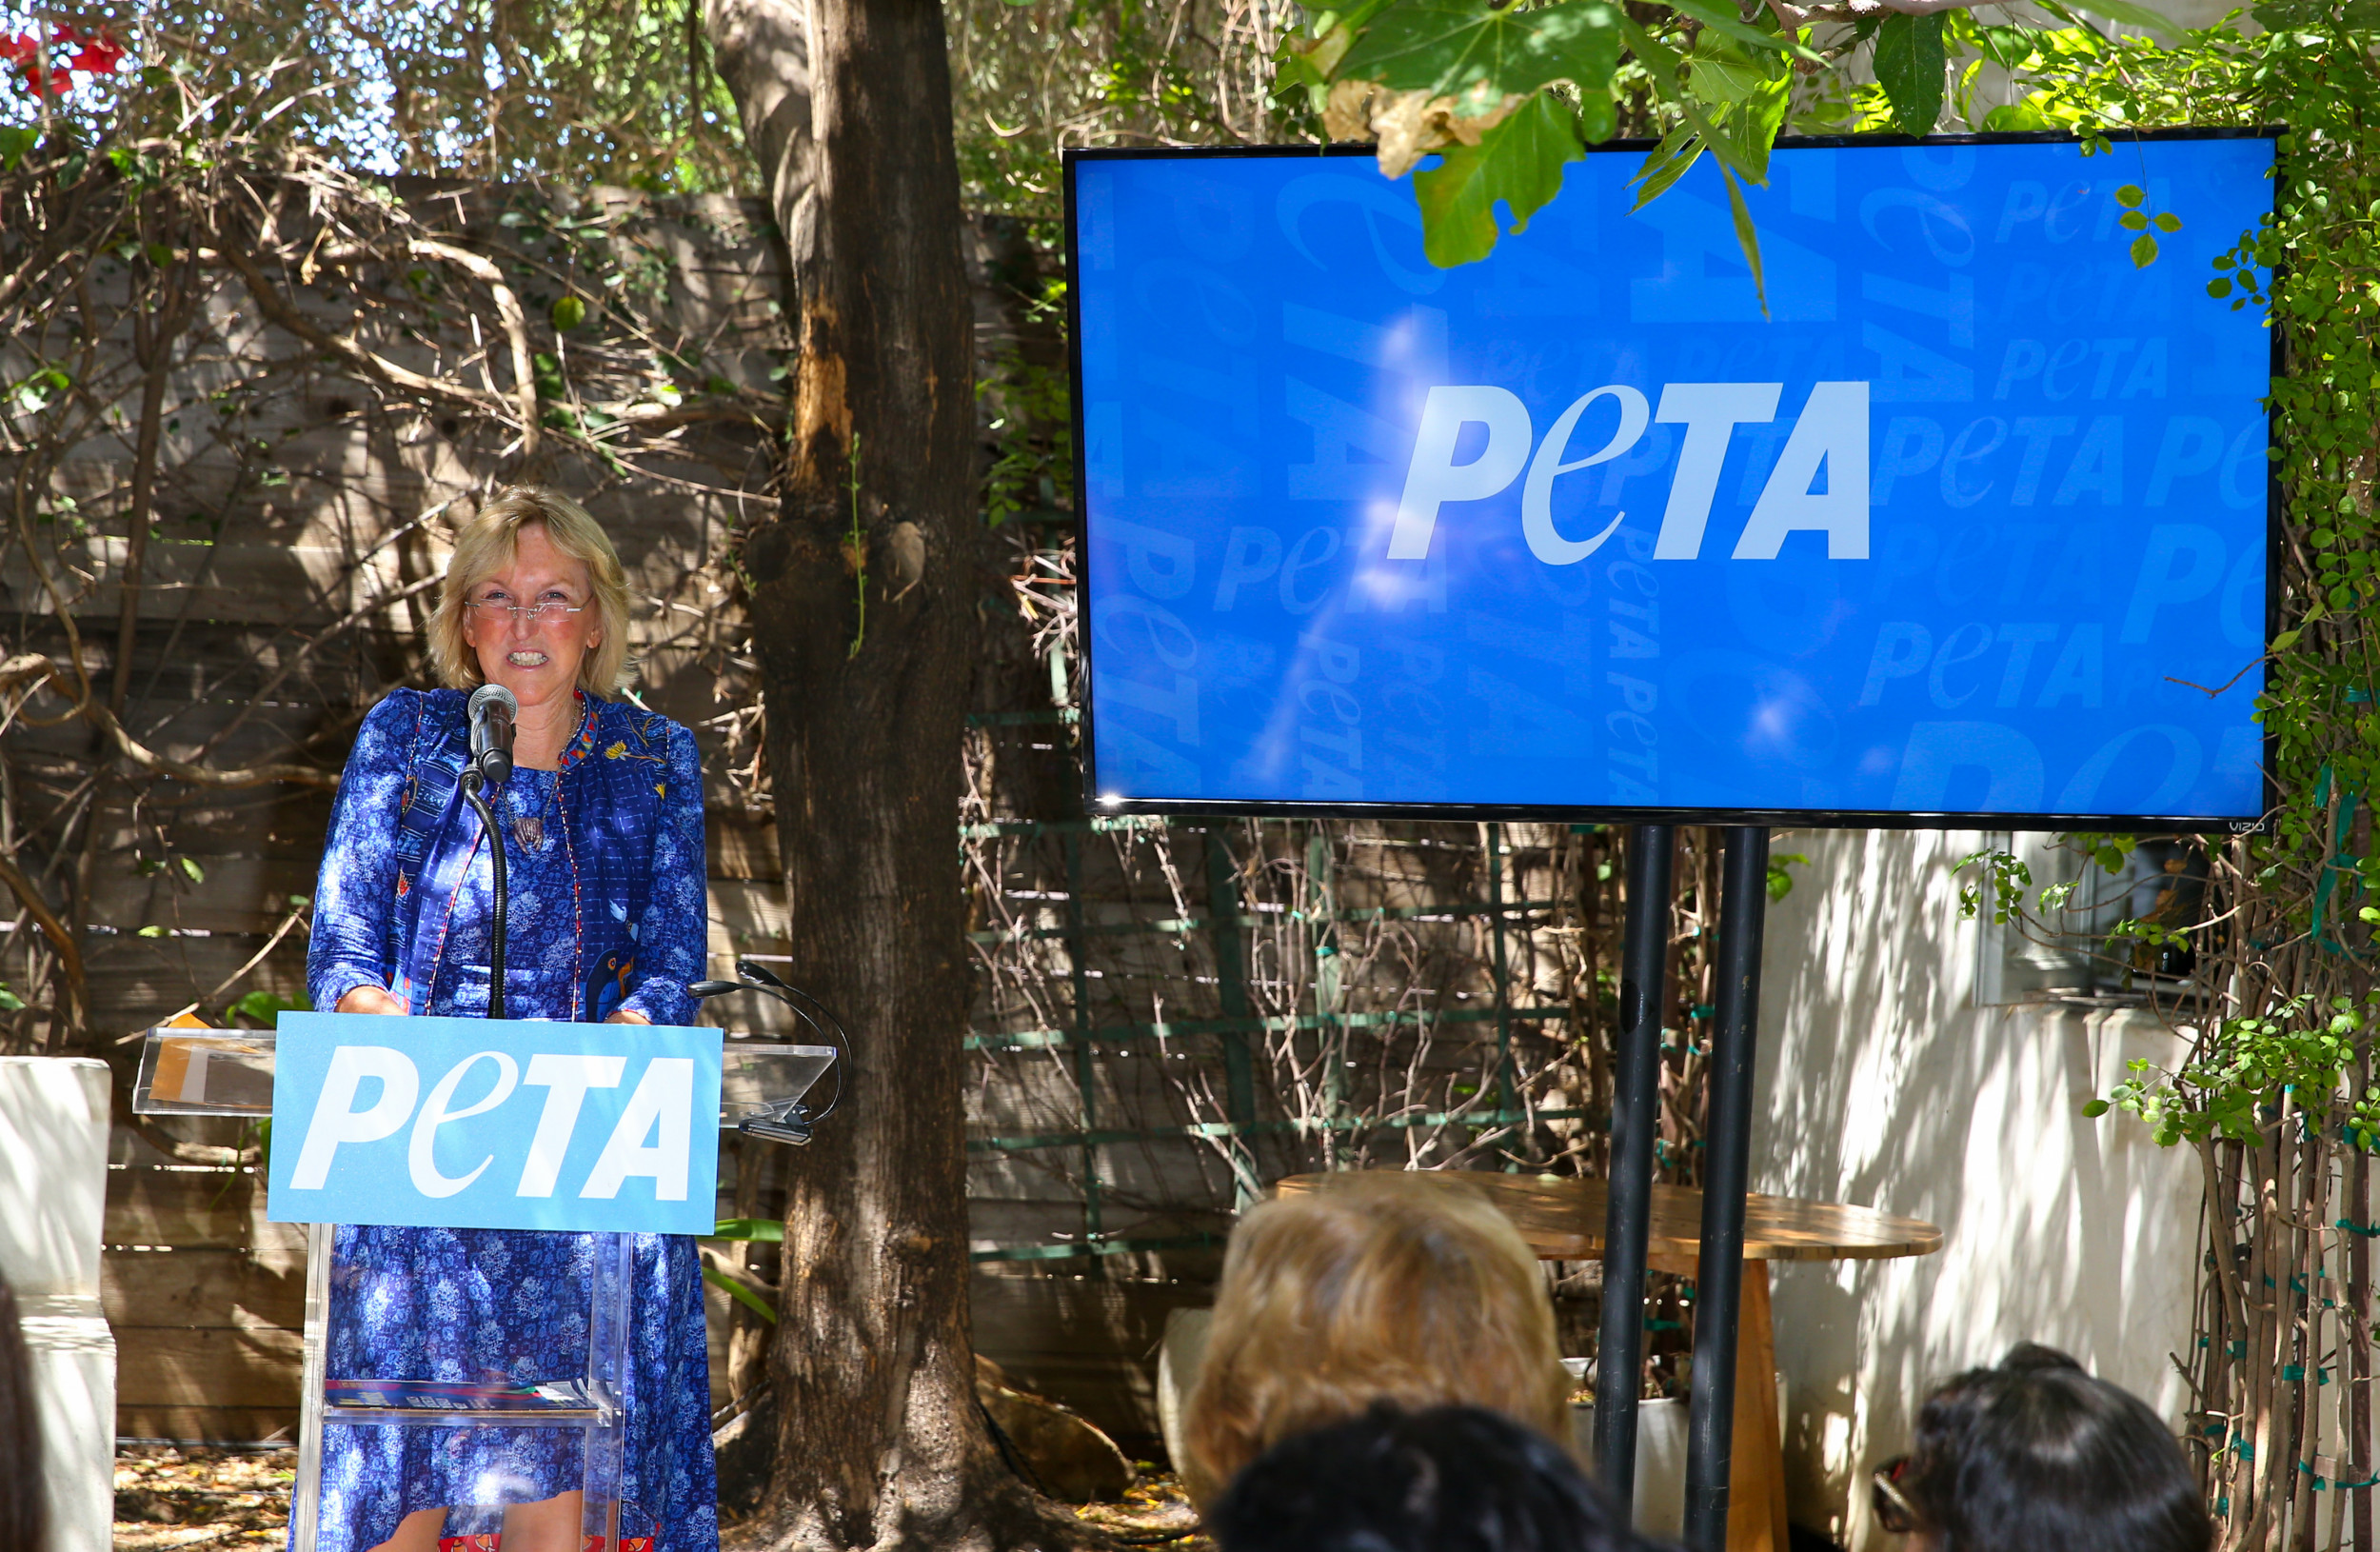 Fact Check: Is PETA Responsible for the Deaths of Thousands of Animals?